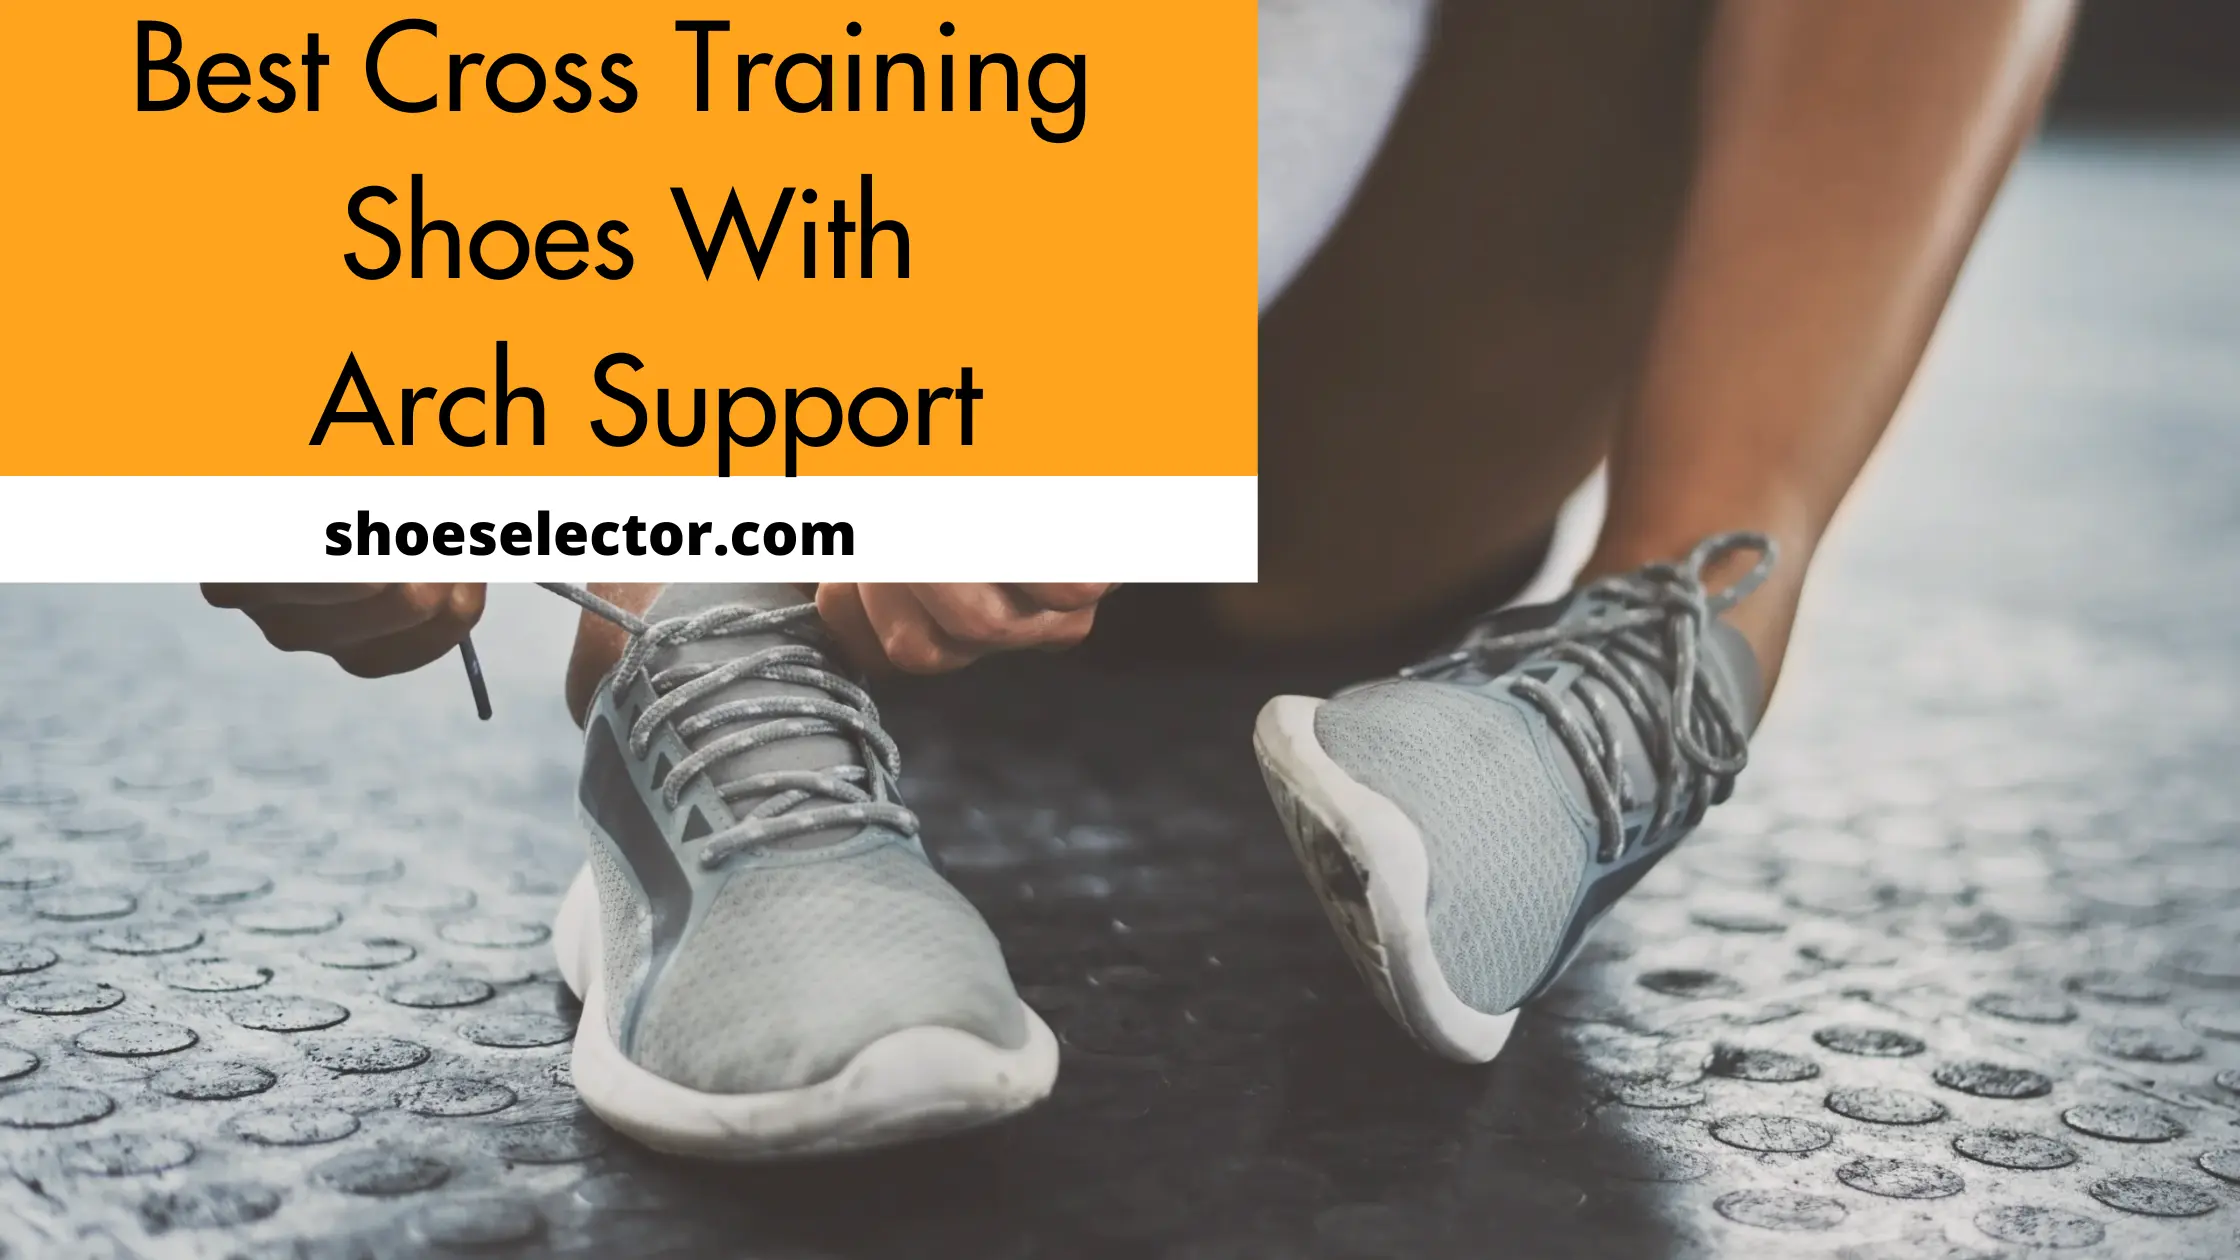 Best Cross Training Shoes With Arch Support - Complete Details